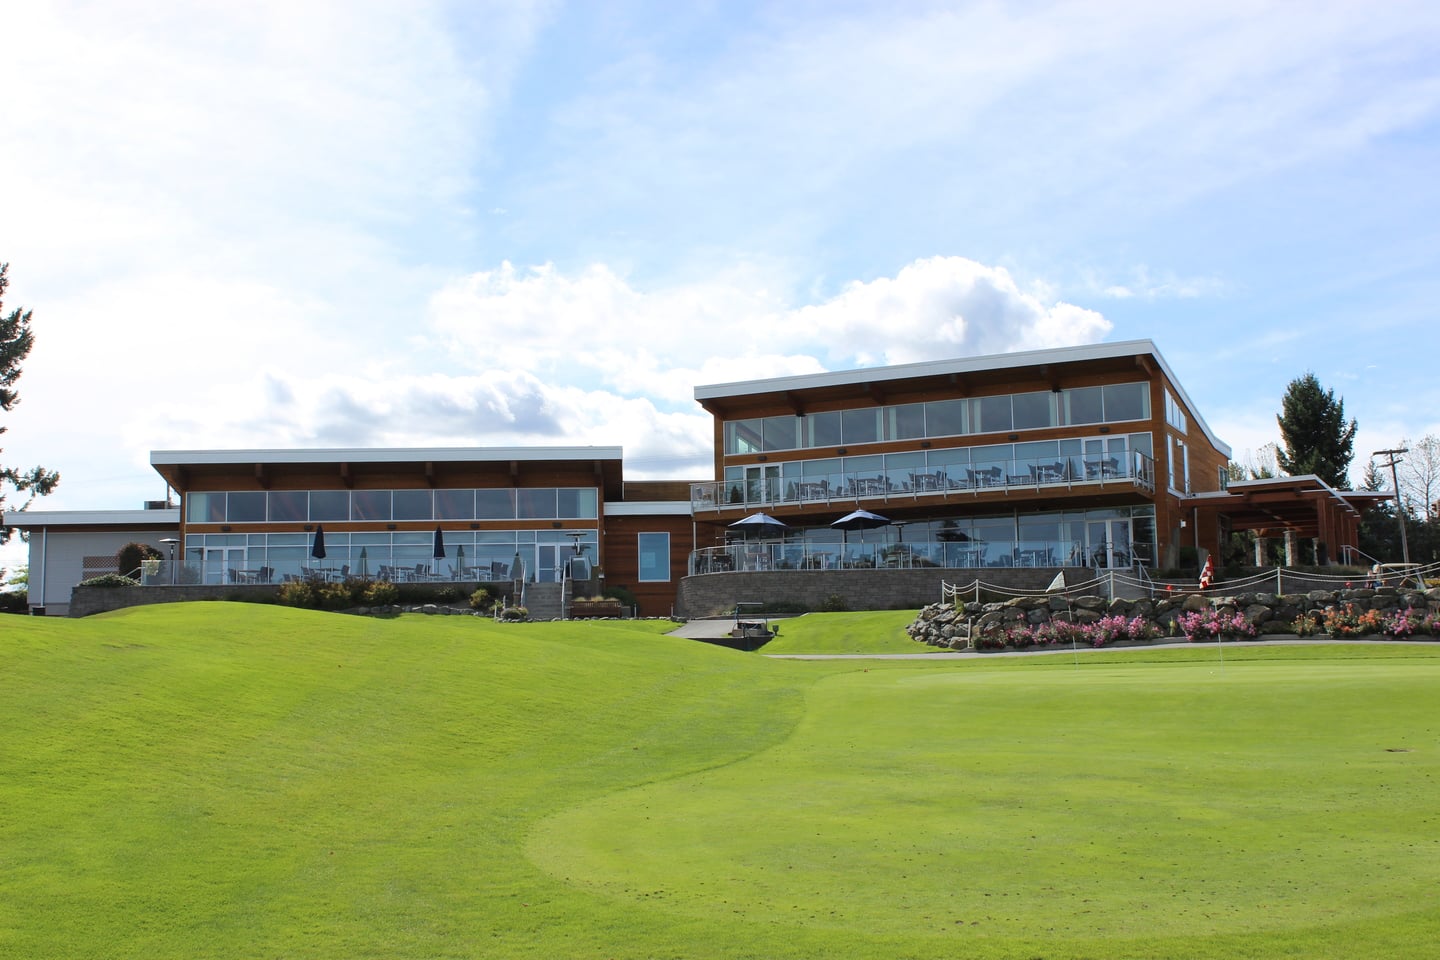 Nanaimo golf clubhouse overlooking green